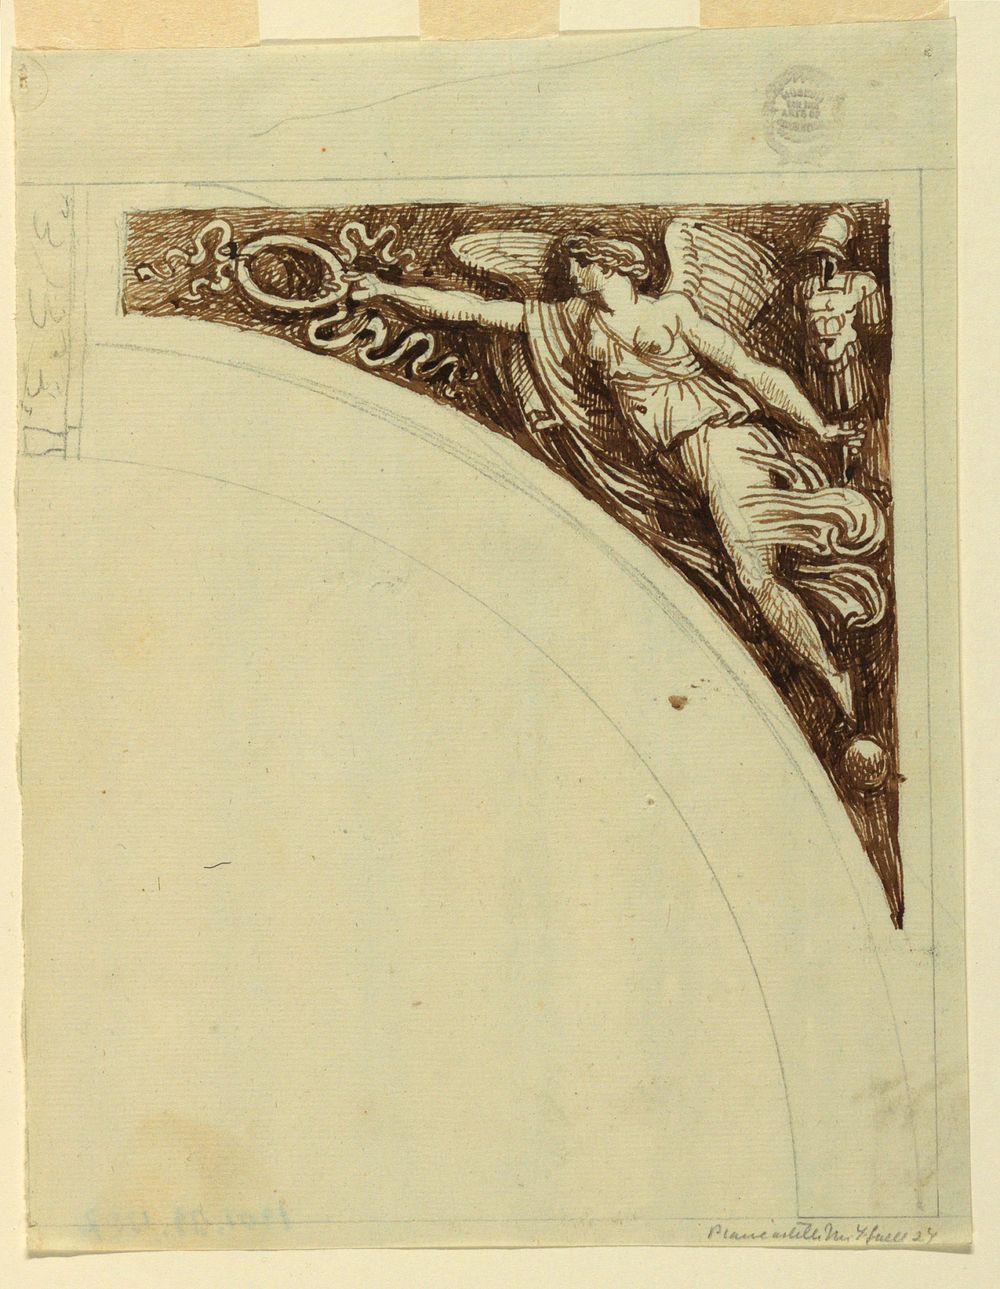 A Winged Victory in the Right Spandrel of an Arch, Felice Giani